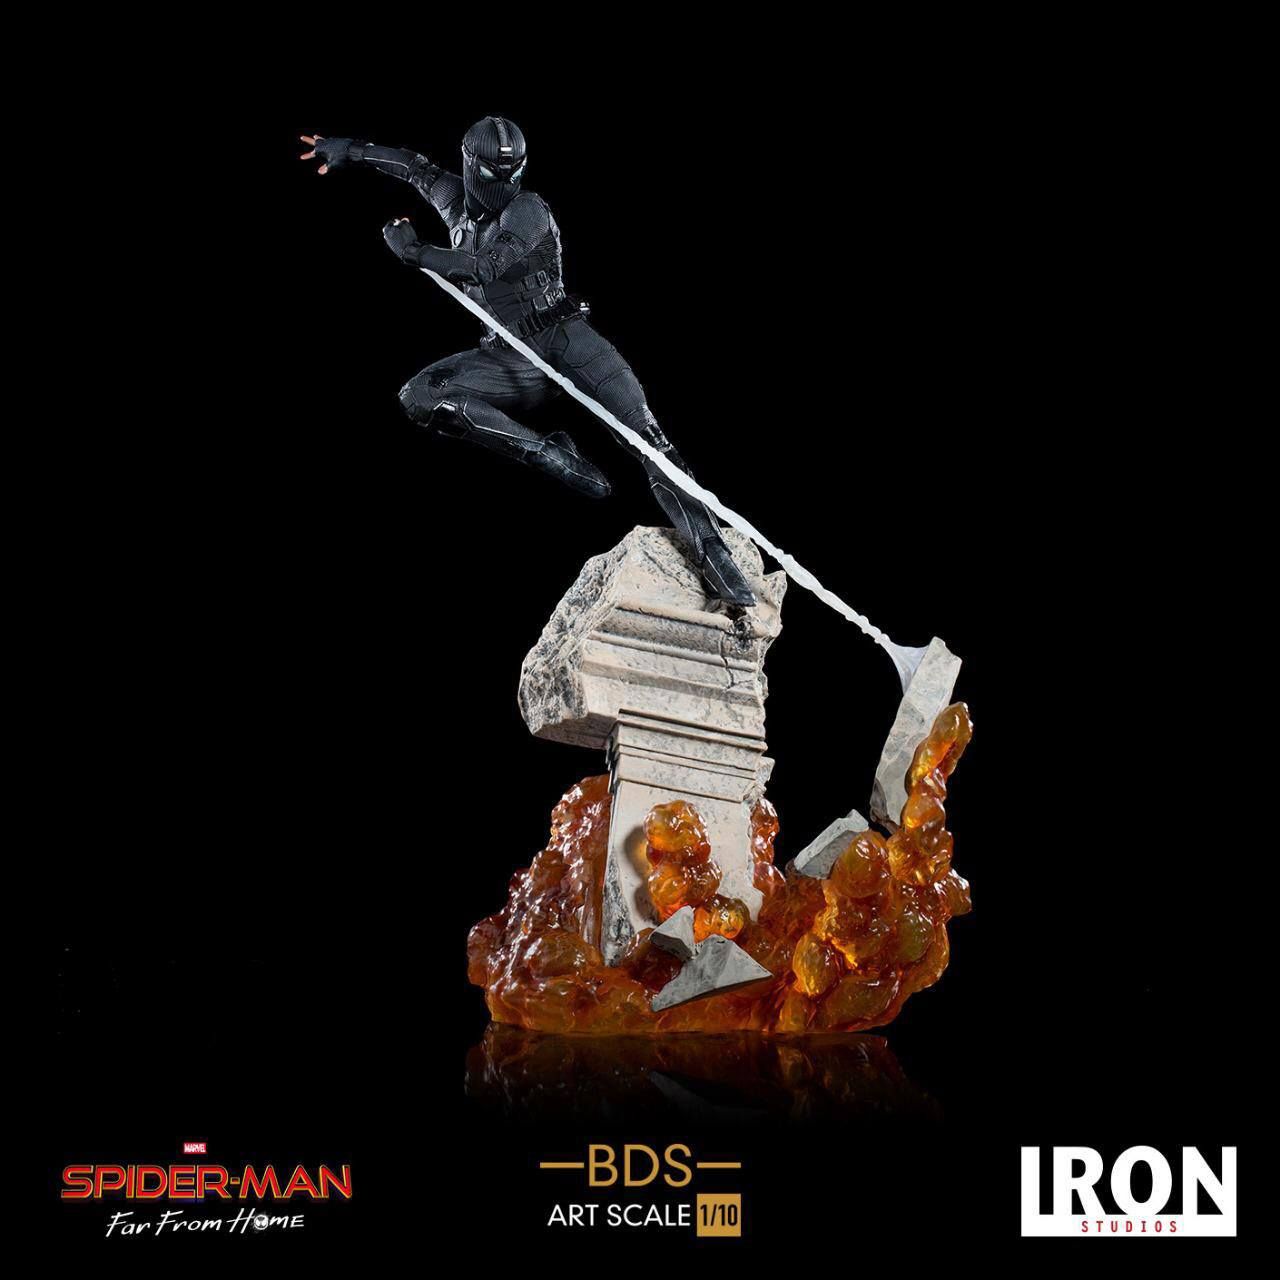 Spider-Man: Far From Home BDS Art Scale Deluxe Soška 1/10 Night Monkey 26 cm Iron Studios